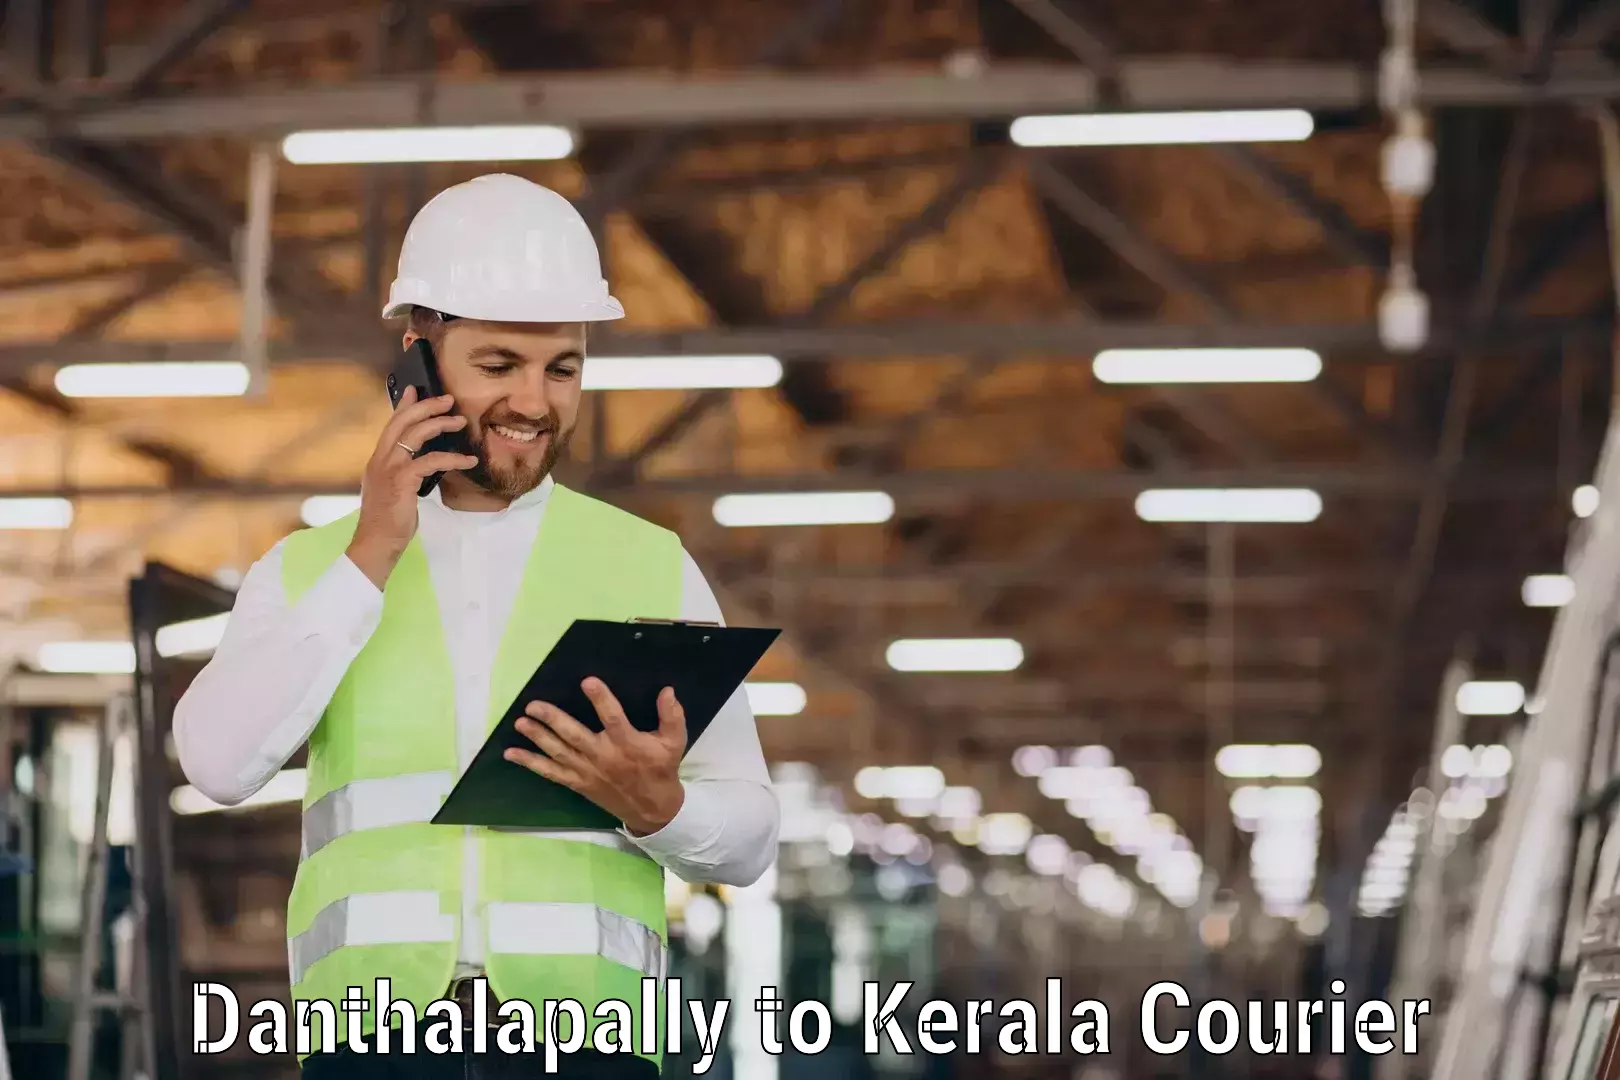 User-friendly delivery service Danthalapally to Kazhakkoottam